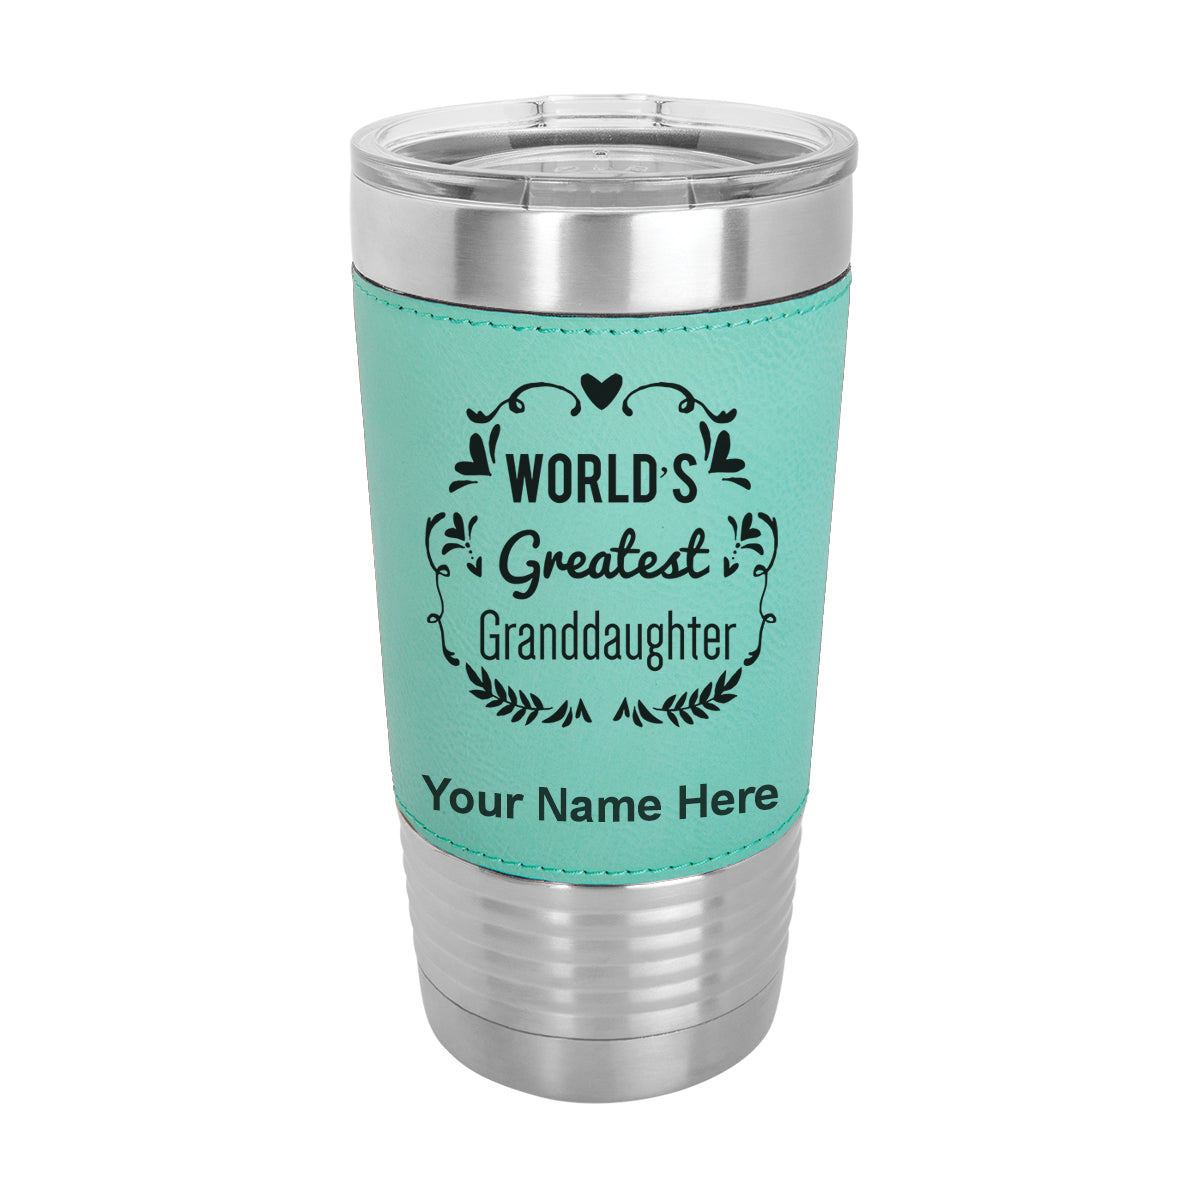 20oz Faux Leather Tumbler Mug, World's Greatest Granddaughter, Personalized Engraving Included